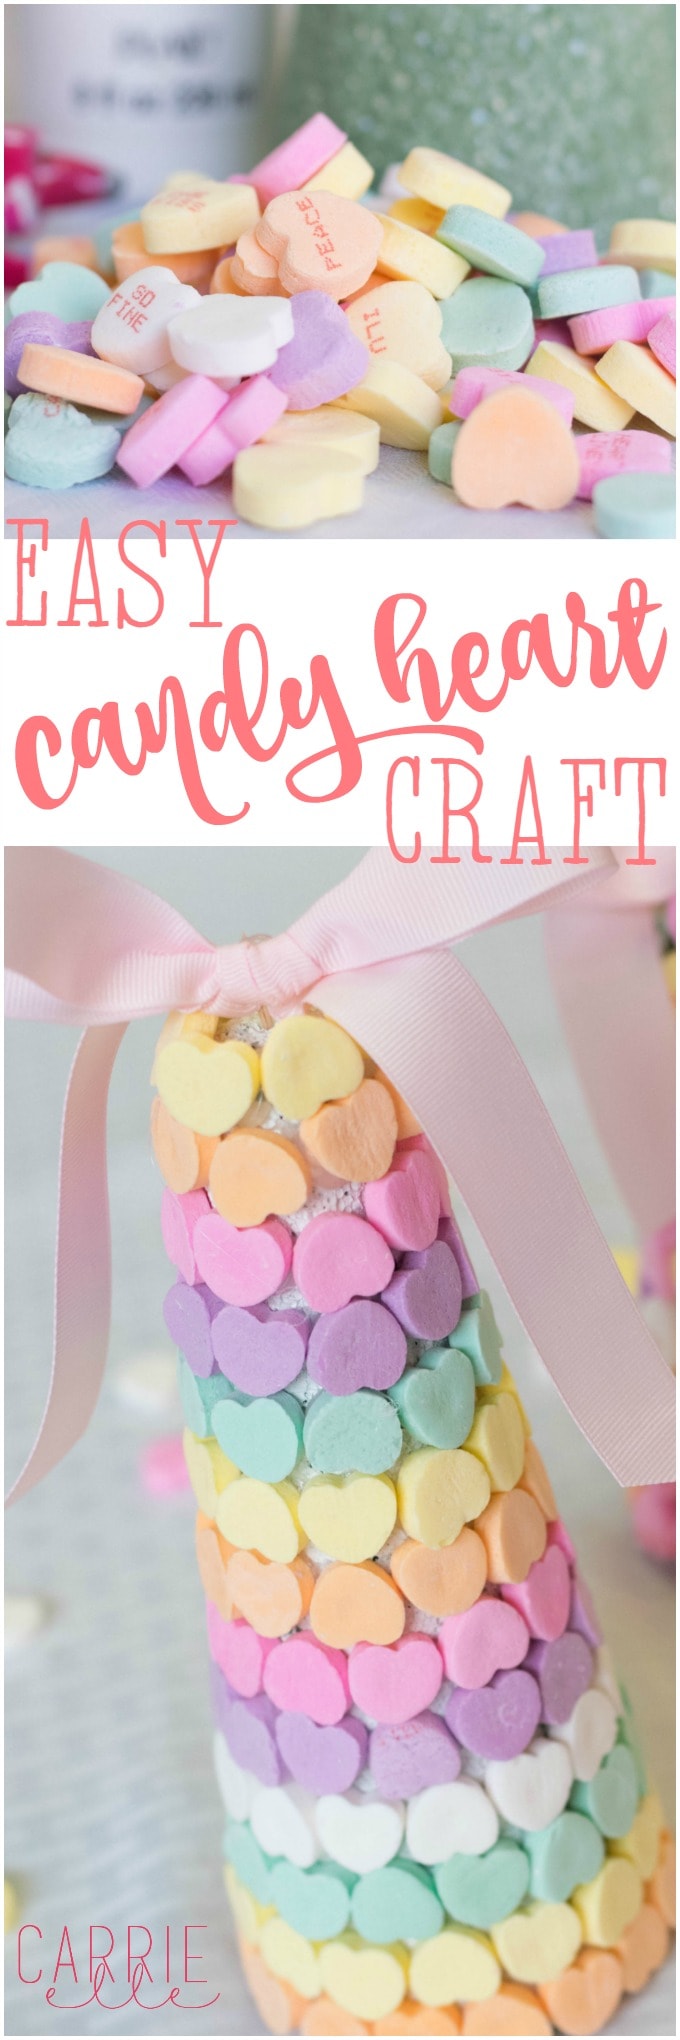 Easy Candy Heart Craft